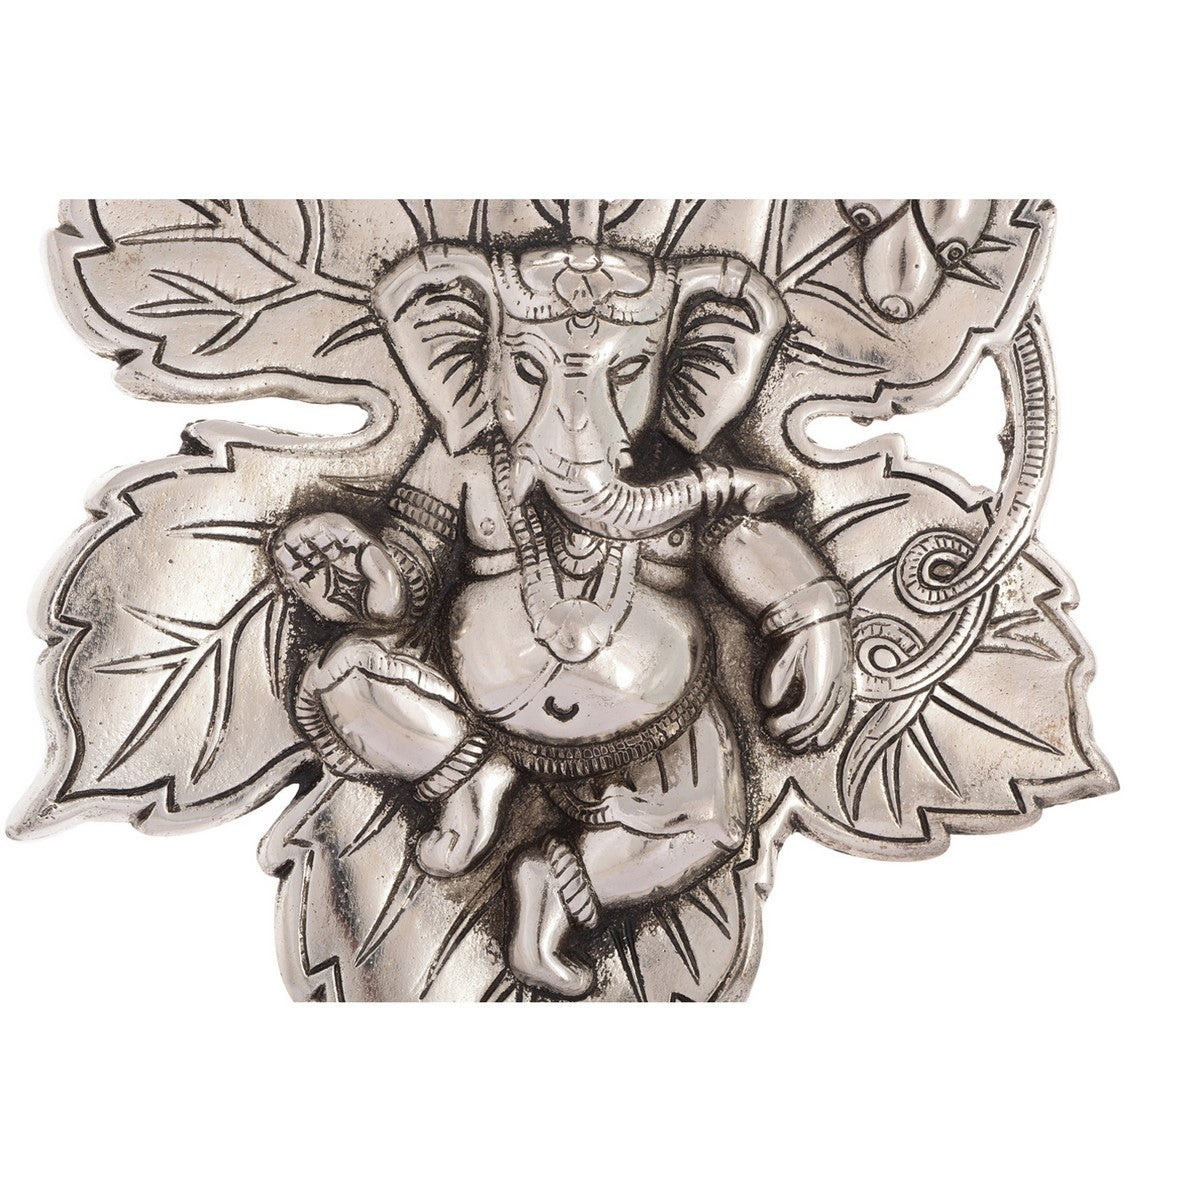 Metal Silver Finish Lord Ganesha on Creative Leaf Handcrafted Metal Wall Hanging 4